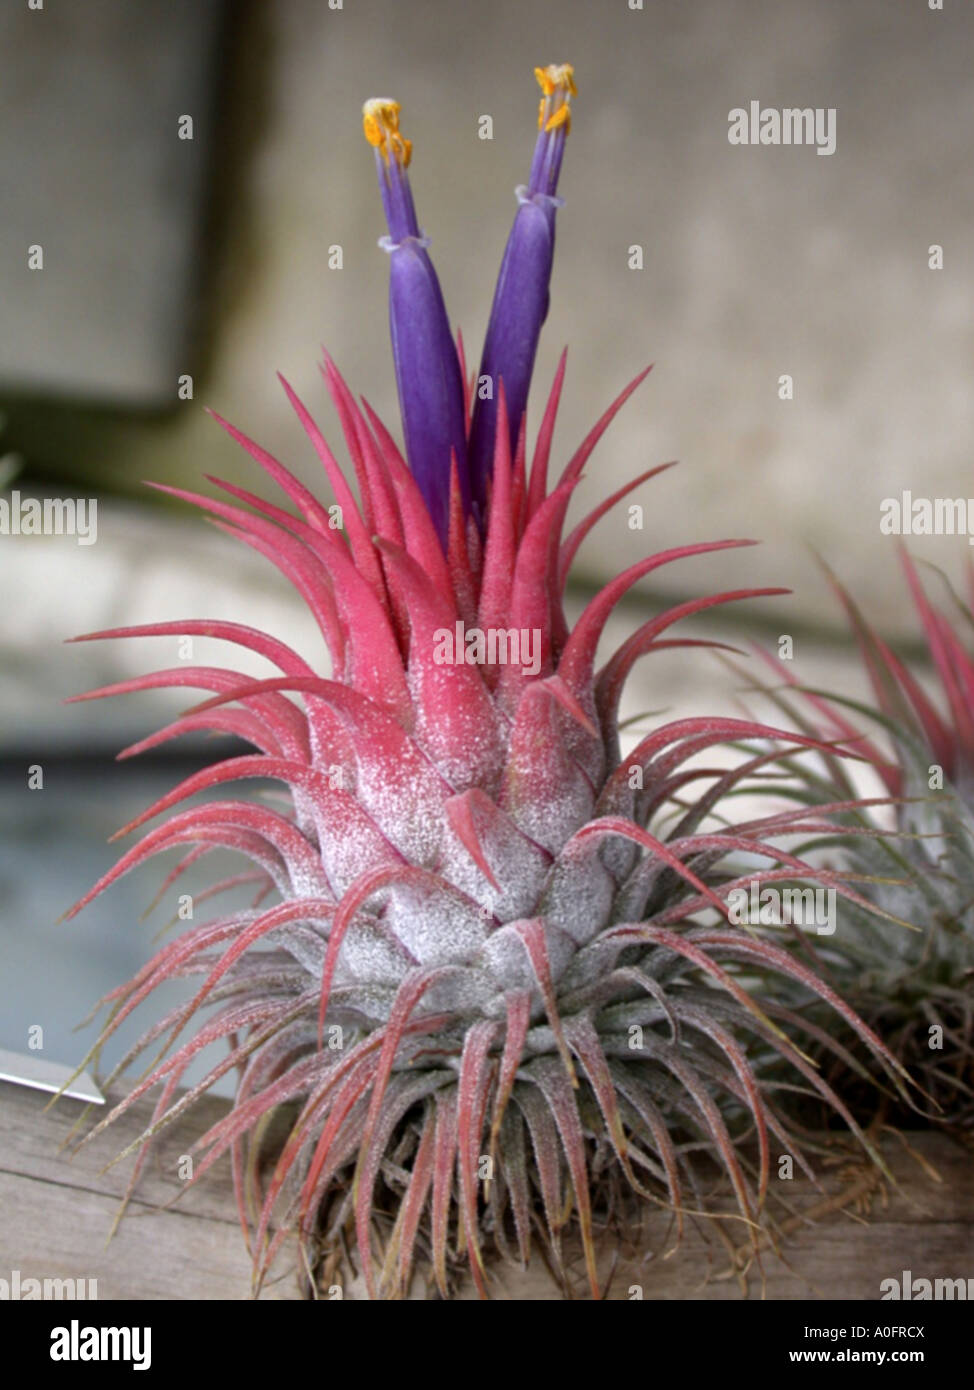 Tillandsie, Tillandsia ionantha (Tillandsia ionantha), blooming Stock Photo